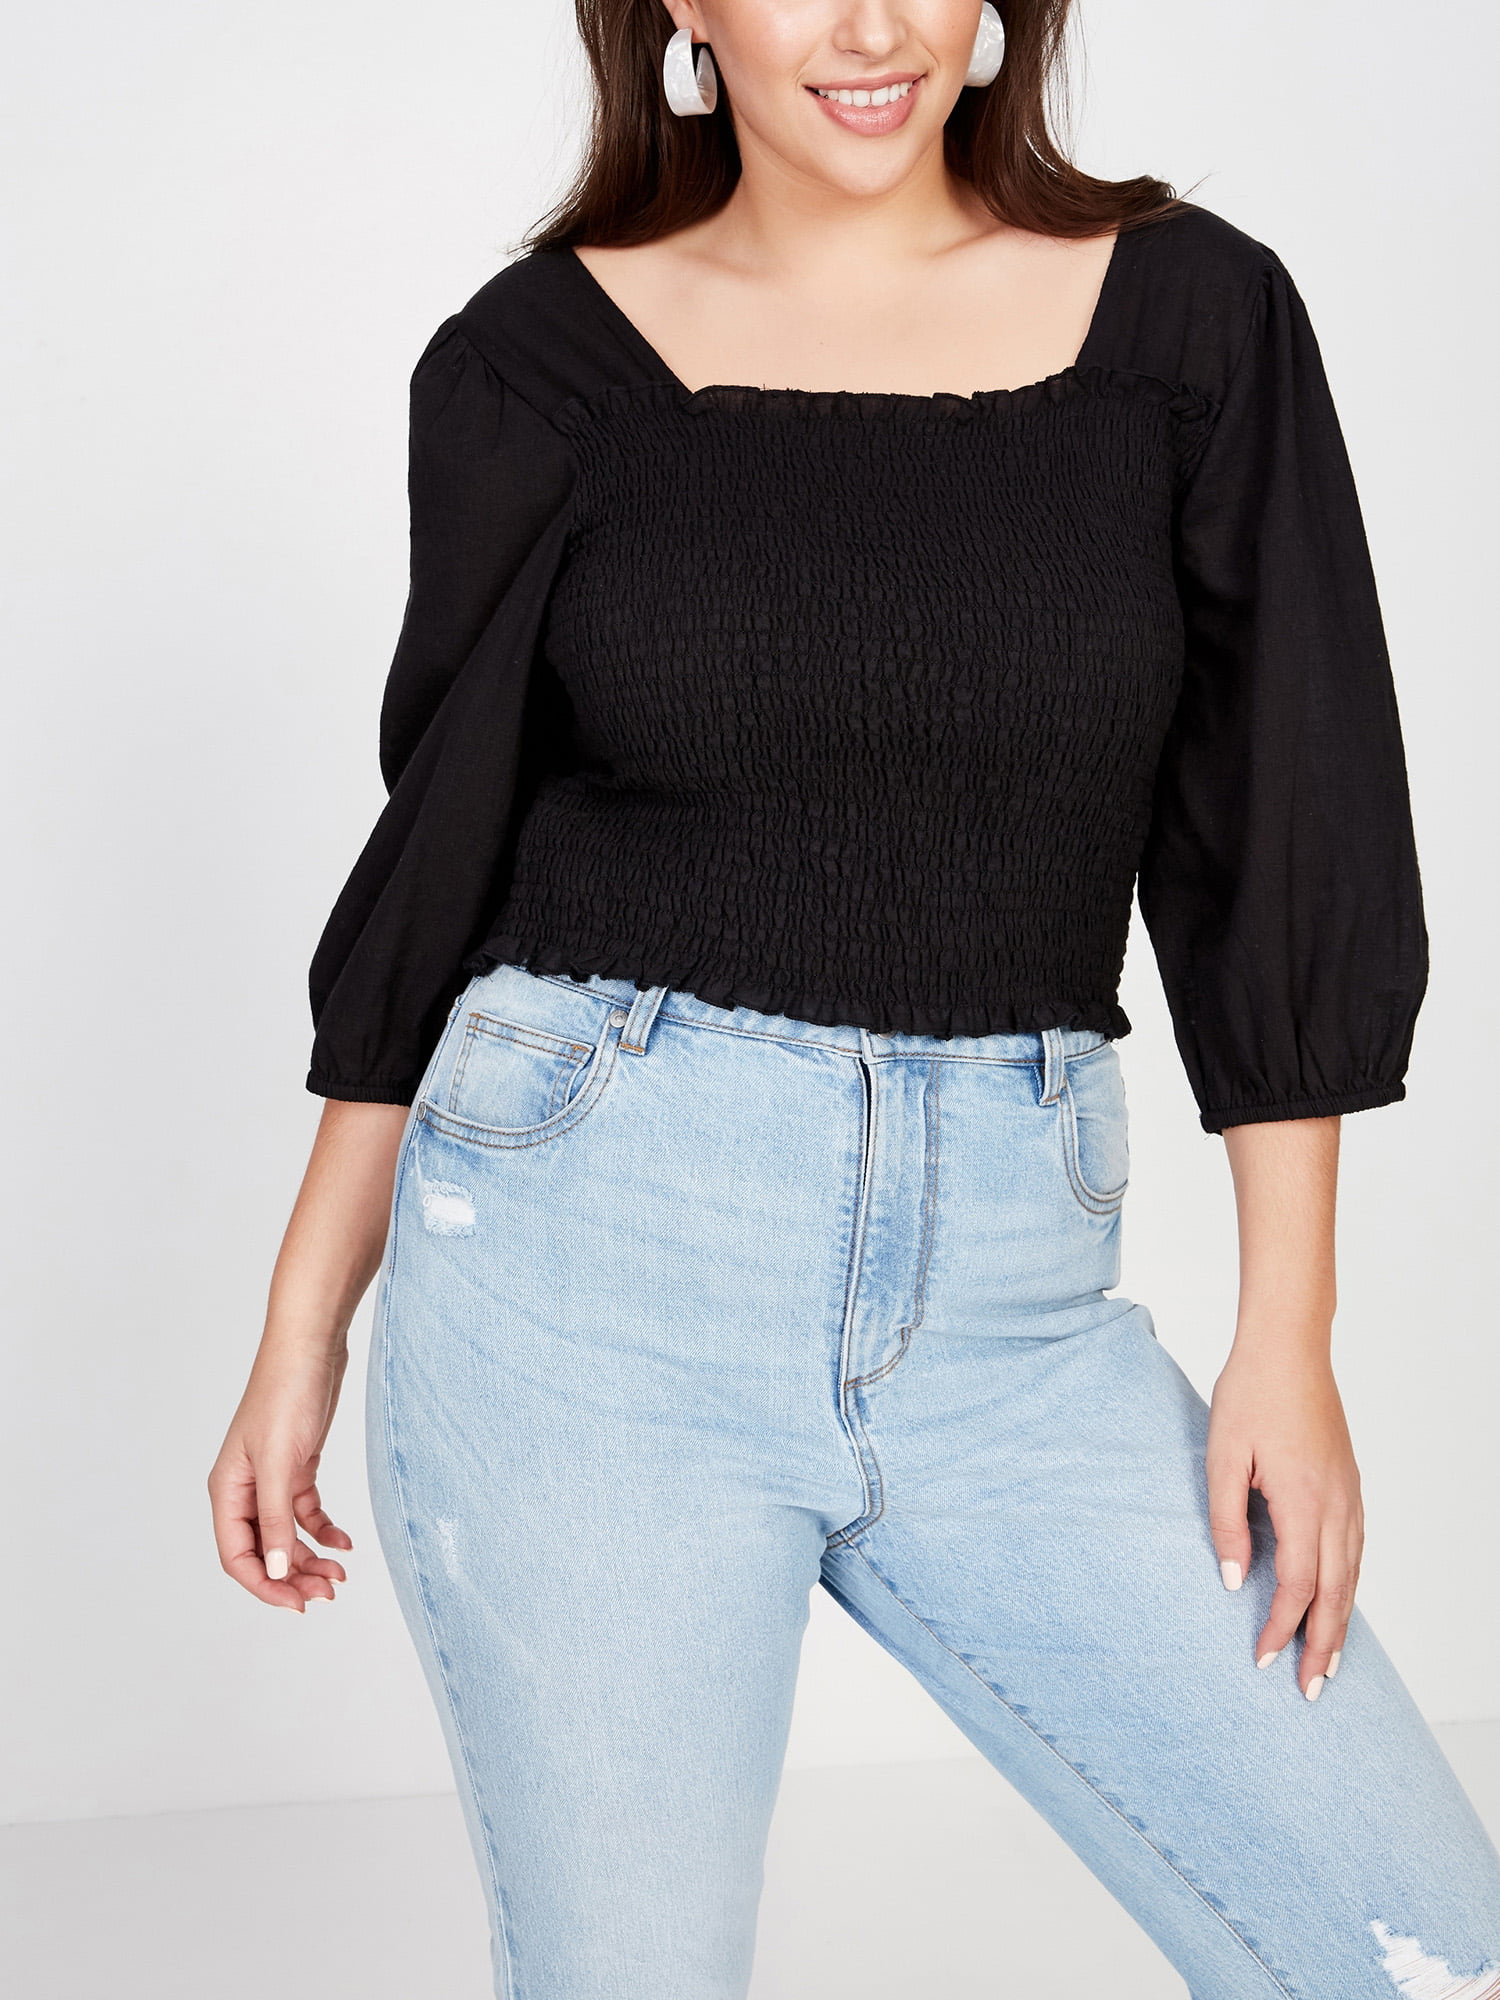 jeans and a nice top plus size